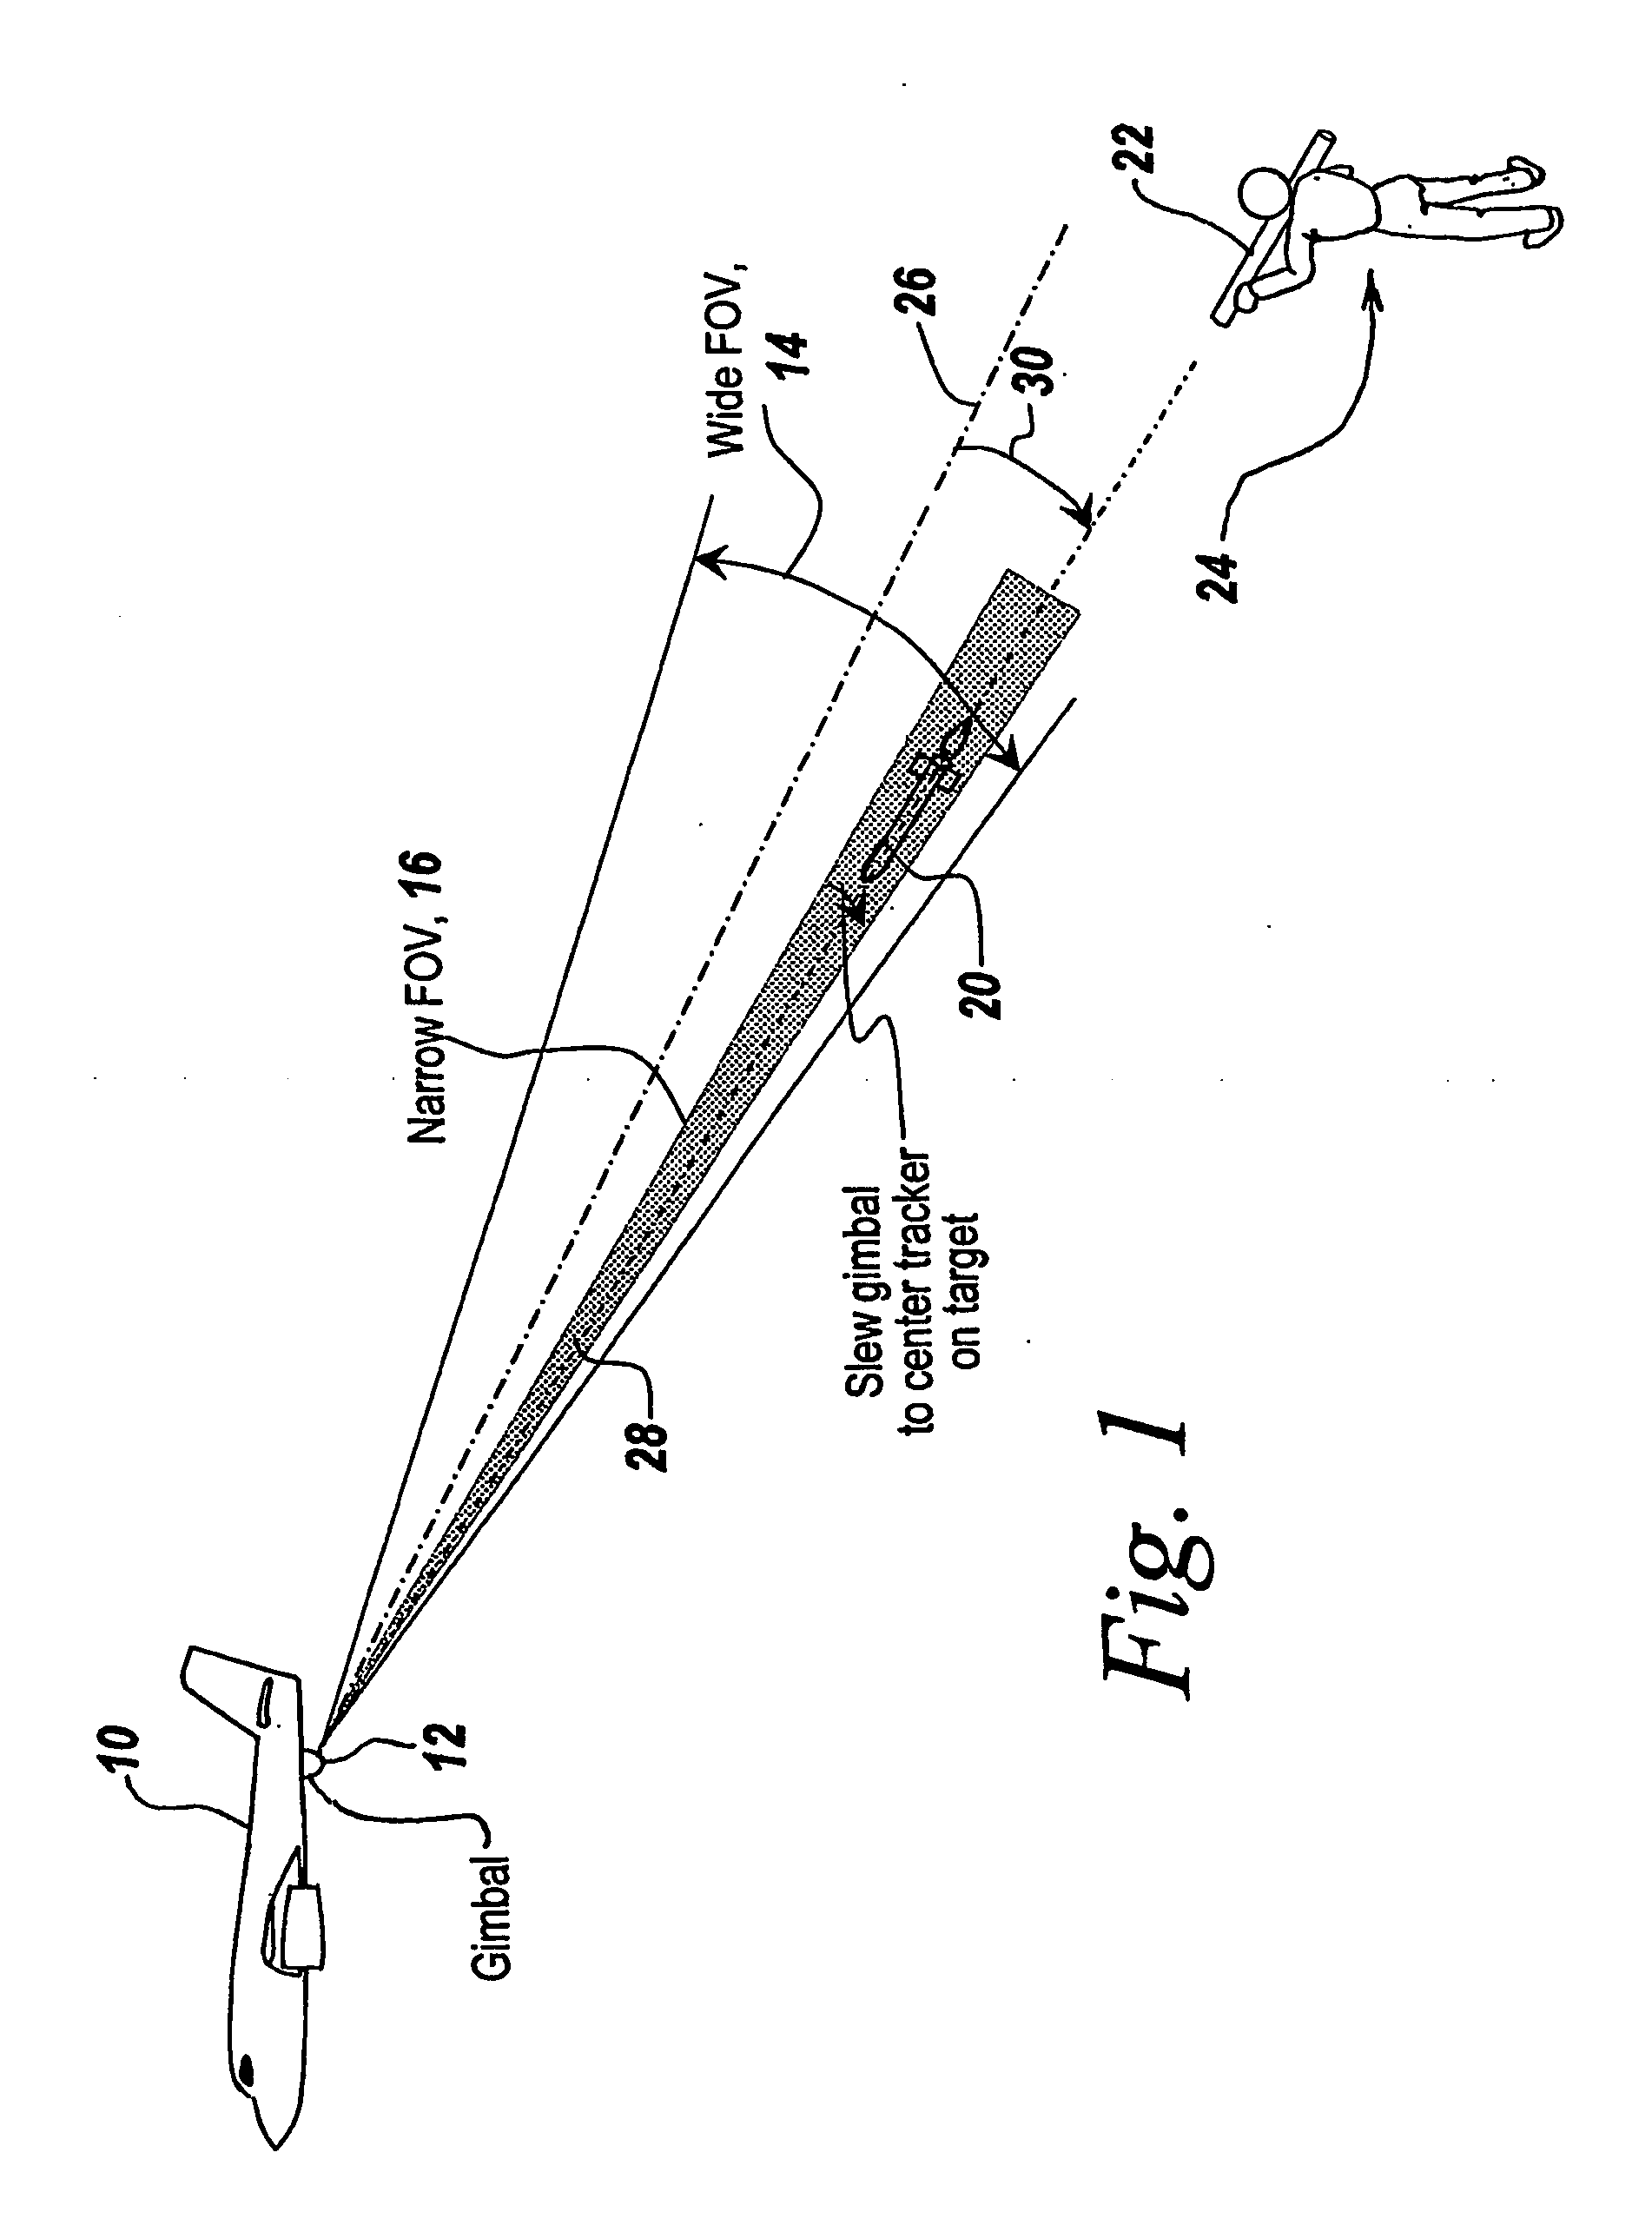 Method and apparatus of using optical distortion in a directed countermeasure system to provide a variable field of view